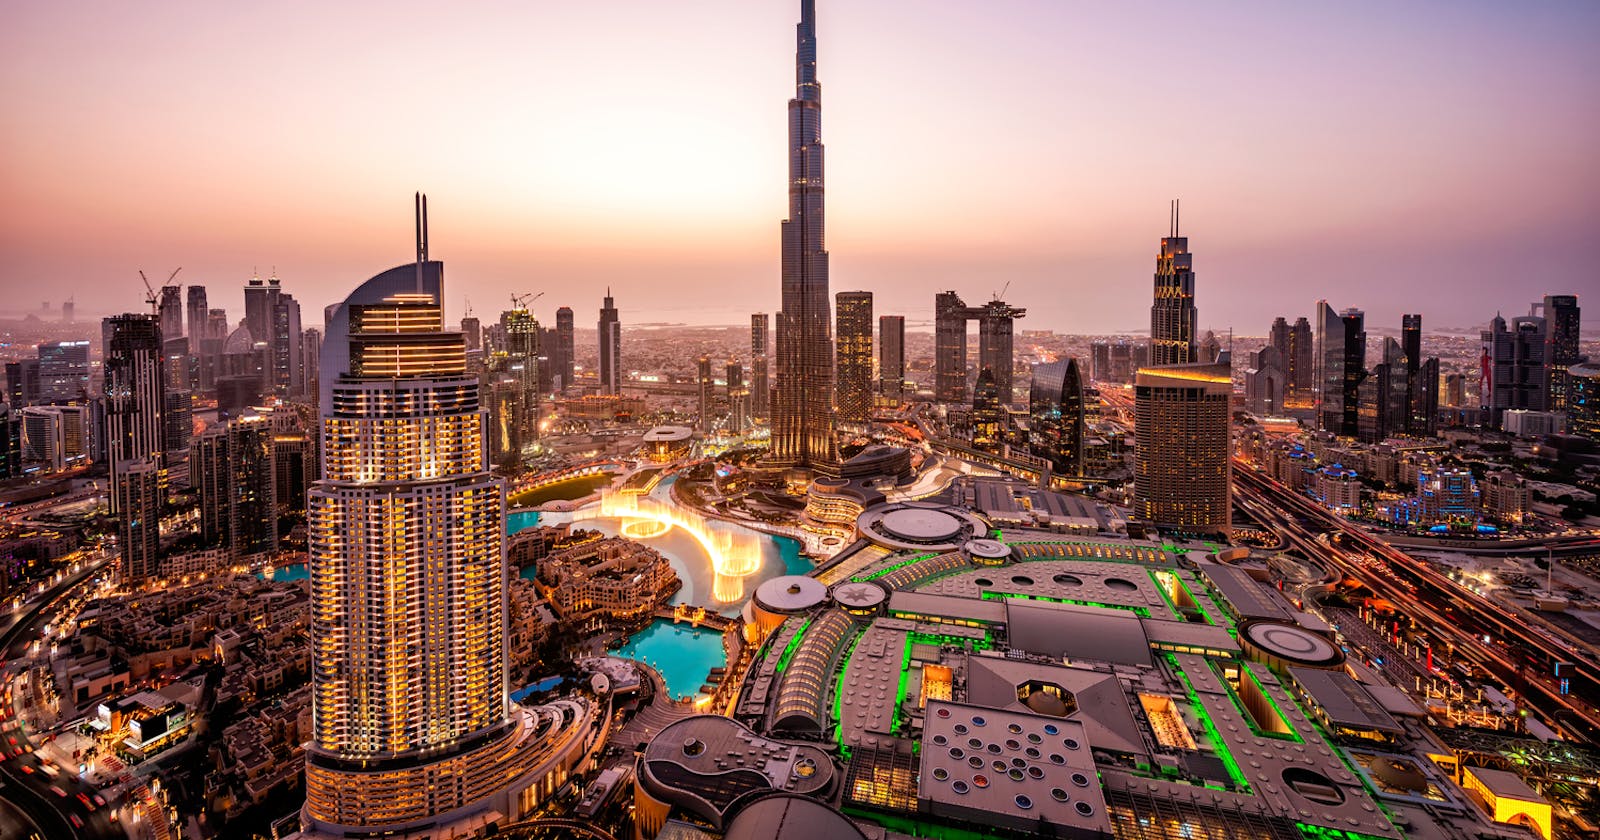 Dubai Remote Worker's Visa - All you need to know.